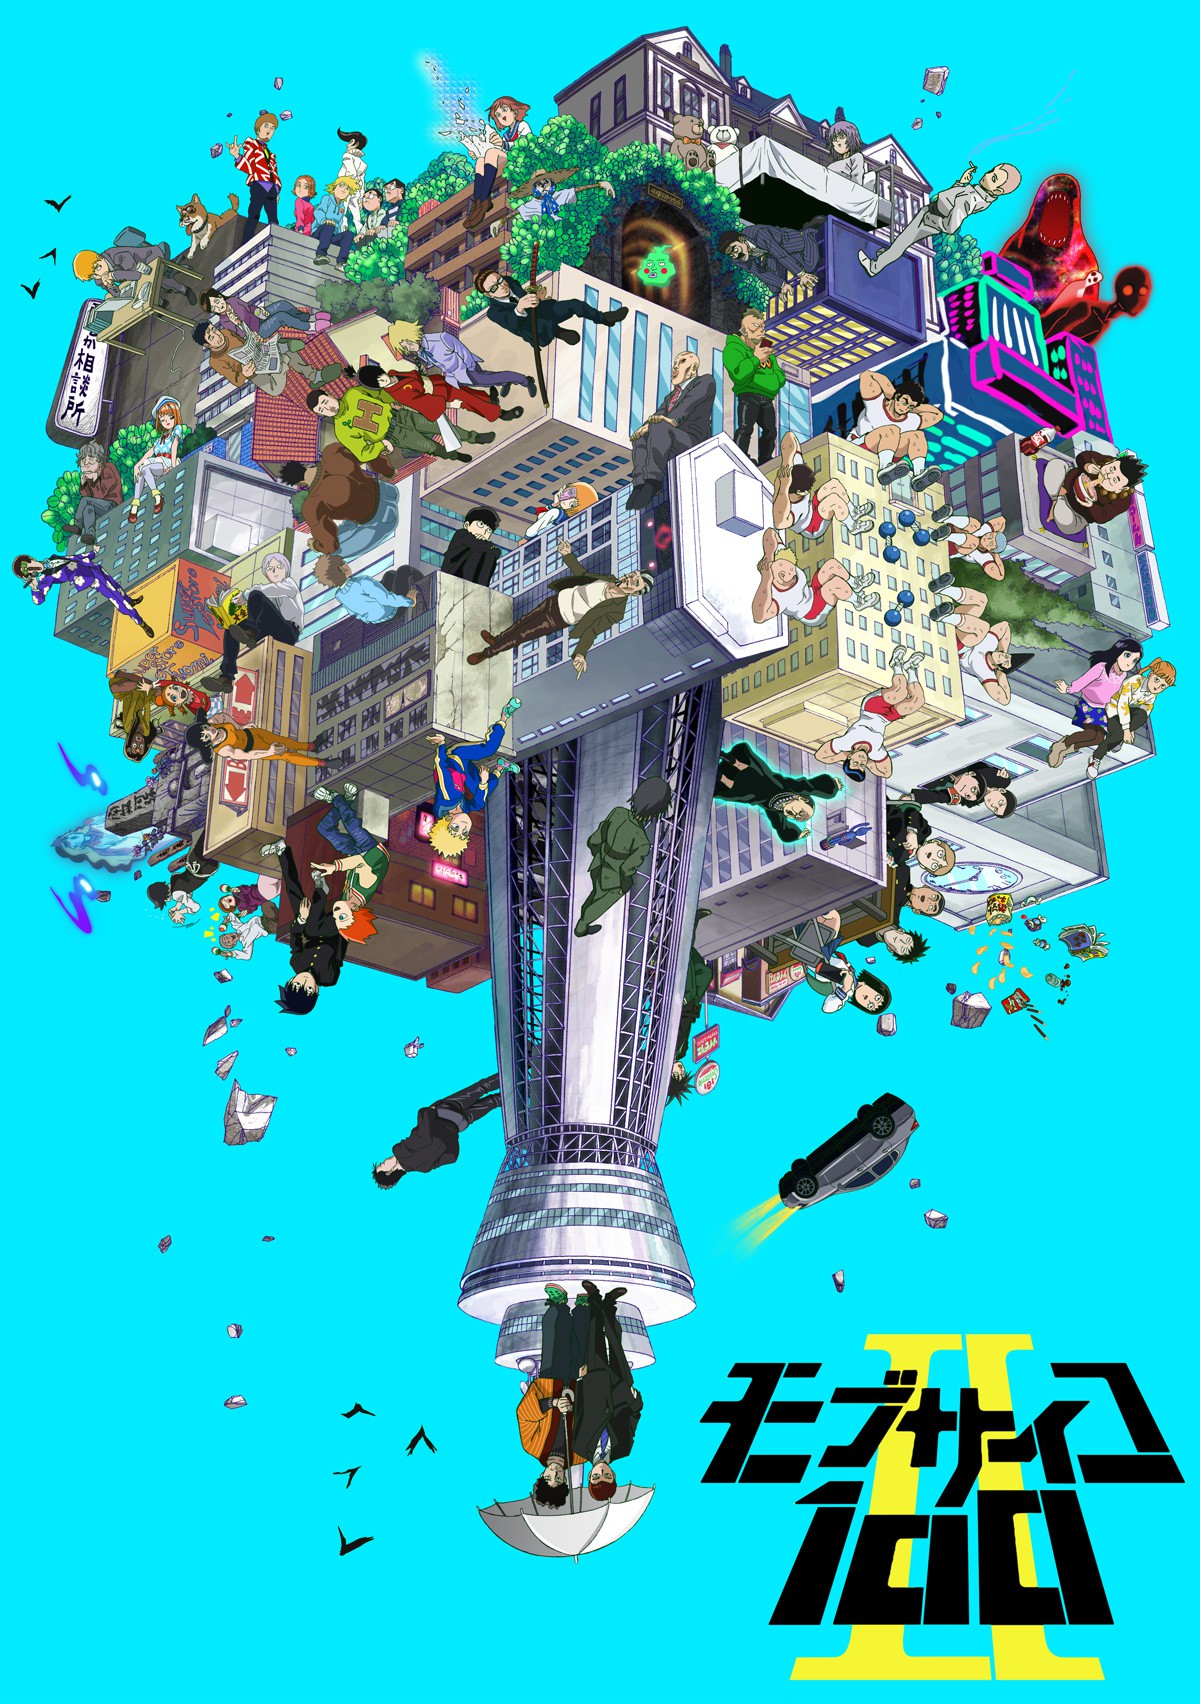 MOB PSYCHO 100 Season 2 Nears and Teases with a New Trailer